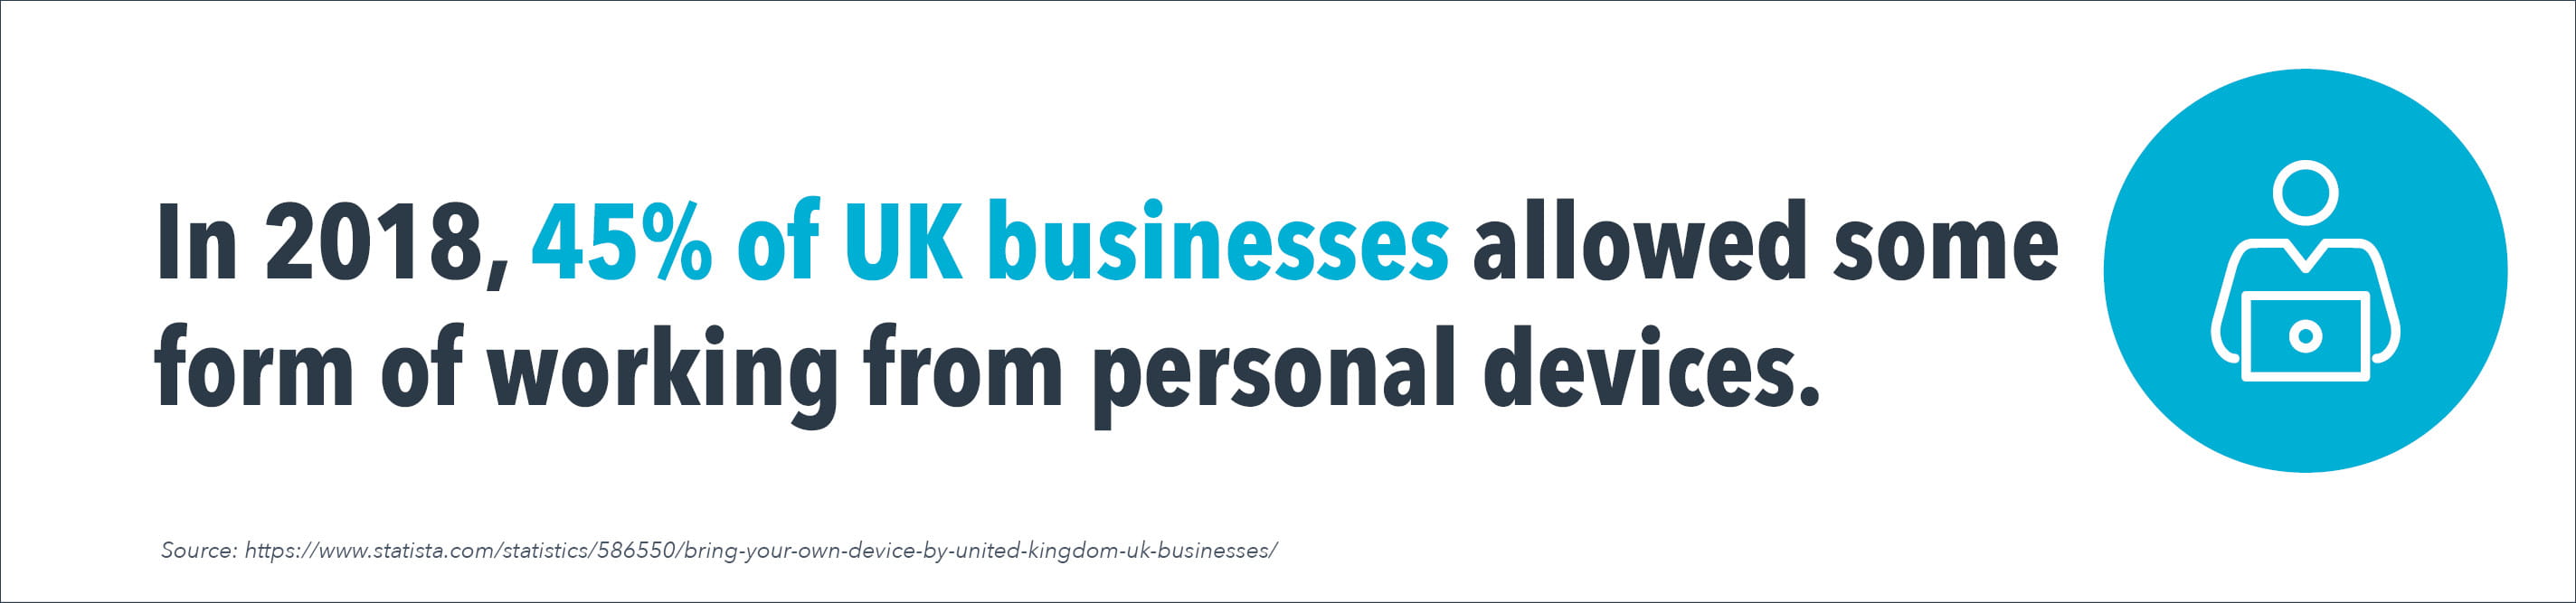 In 2018 45% of businesses allowed some form of working from personal devices